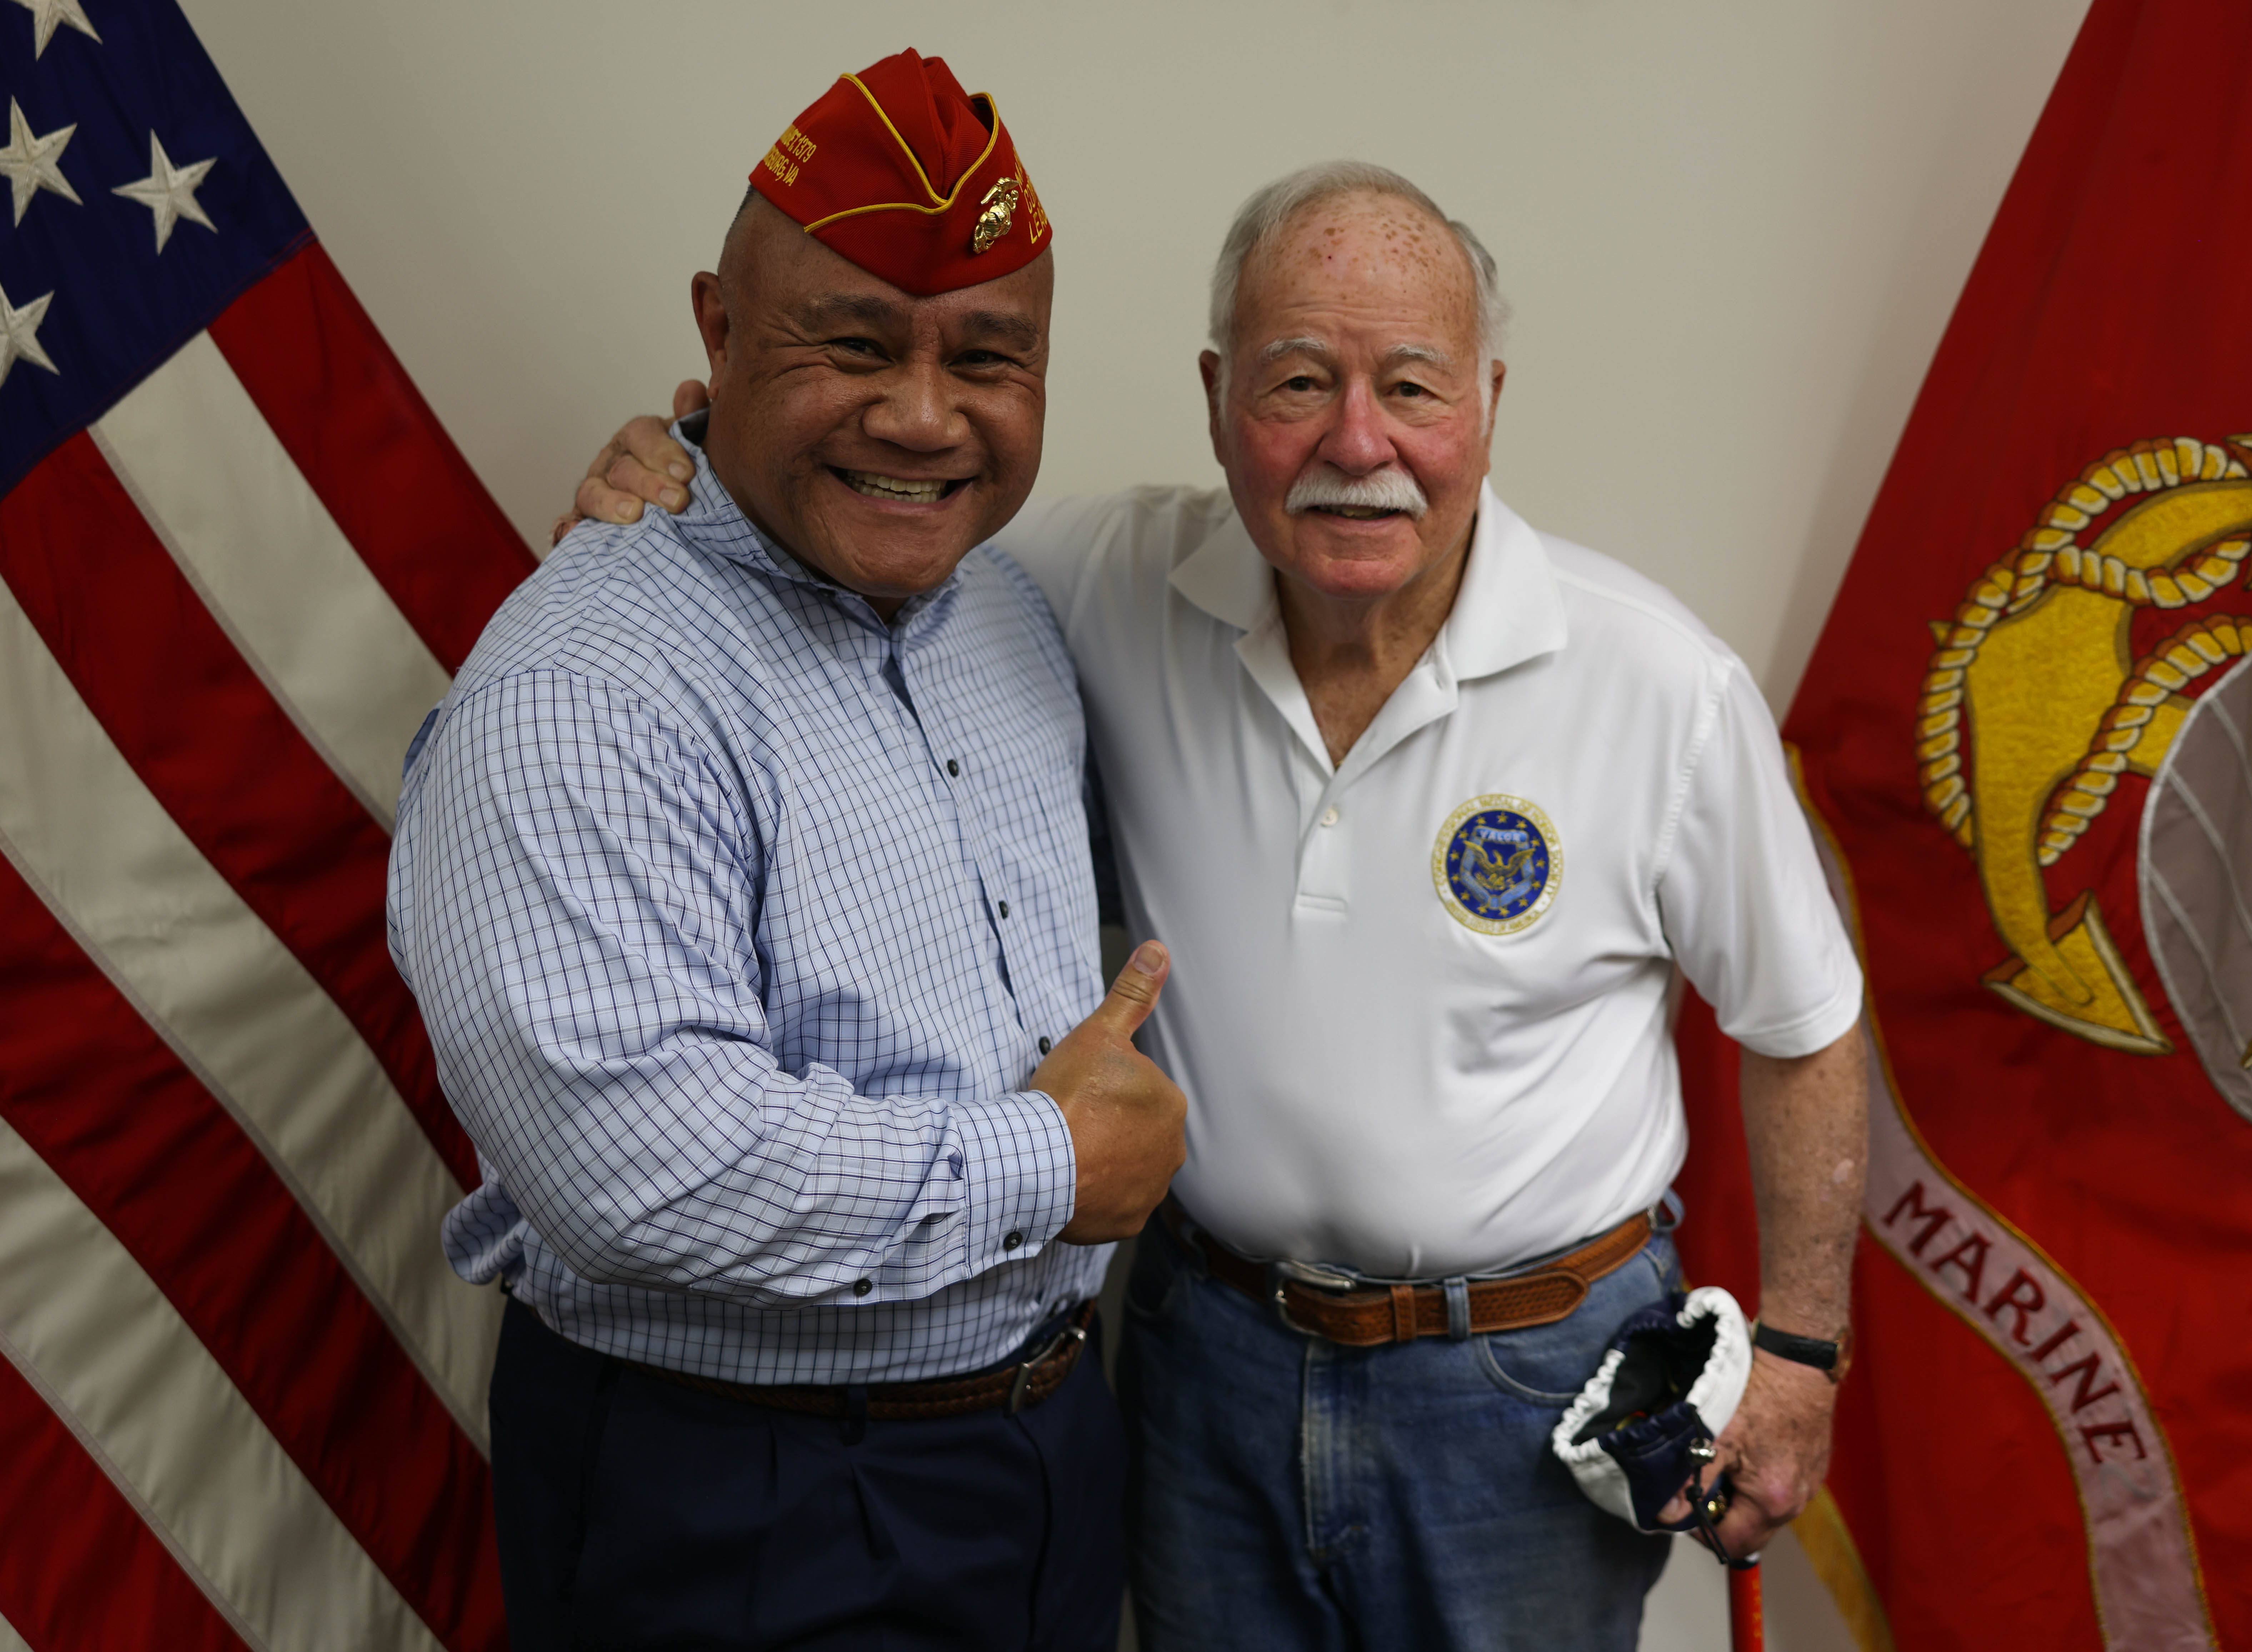 Two men with their arms around each other, the left is a recipient of the Medal of Honor, the right is a retired Marine.